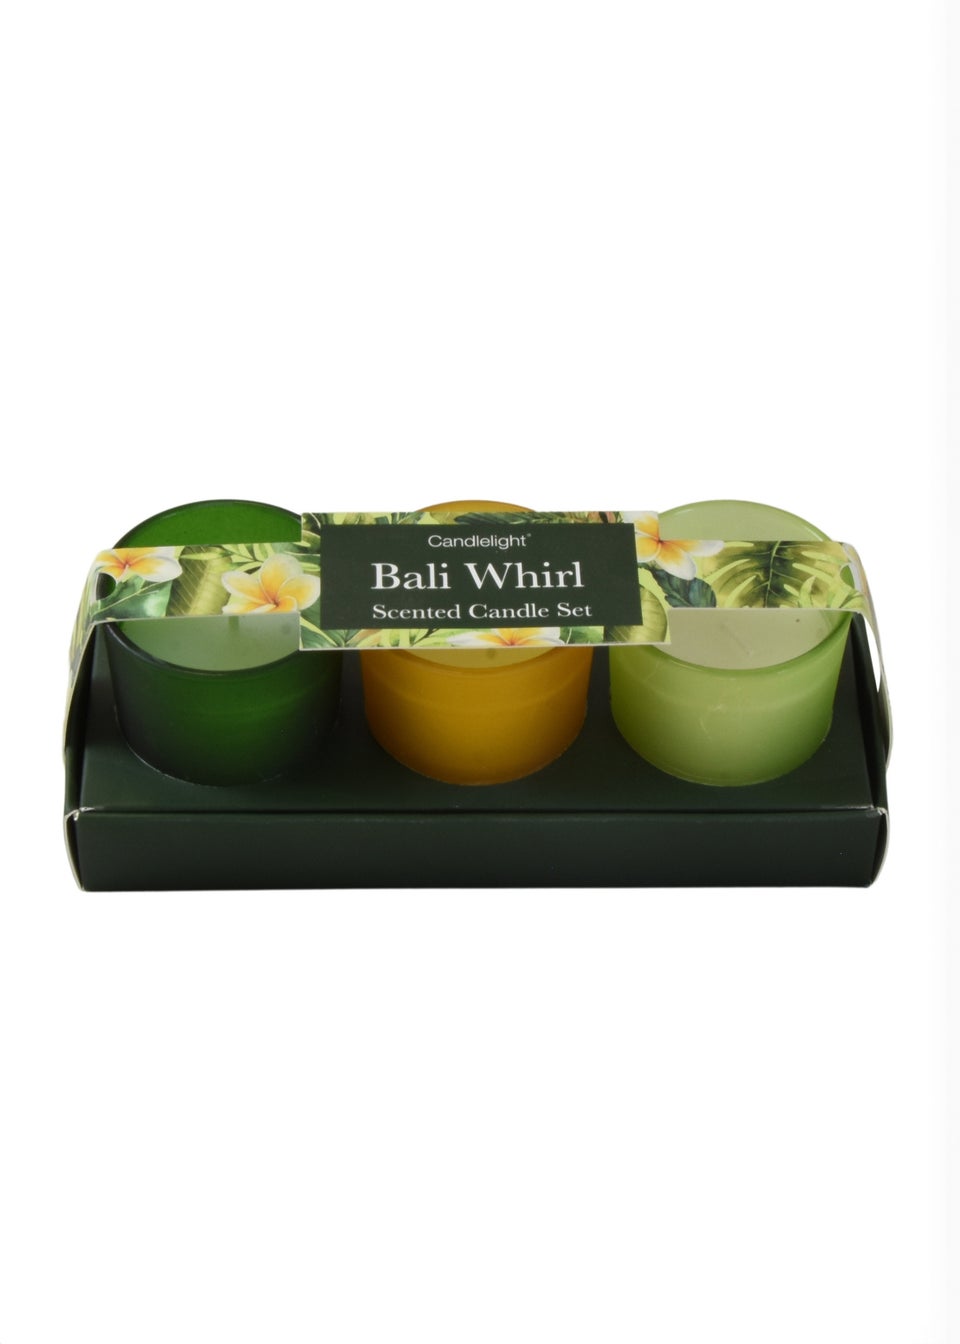 Candlelight 3 Set Bali Whirl Scented Candles